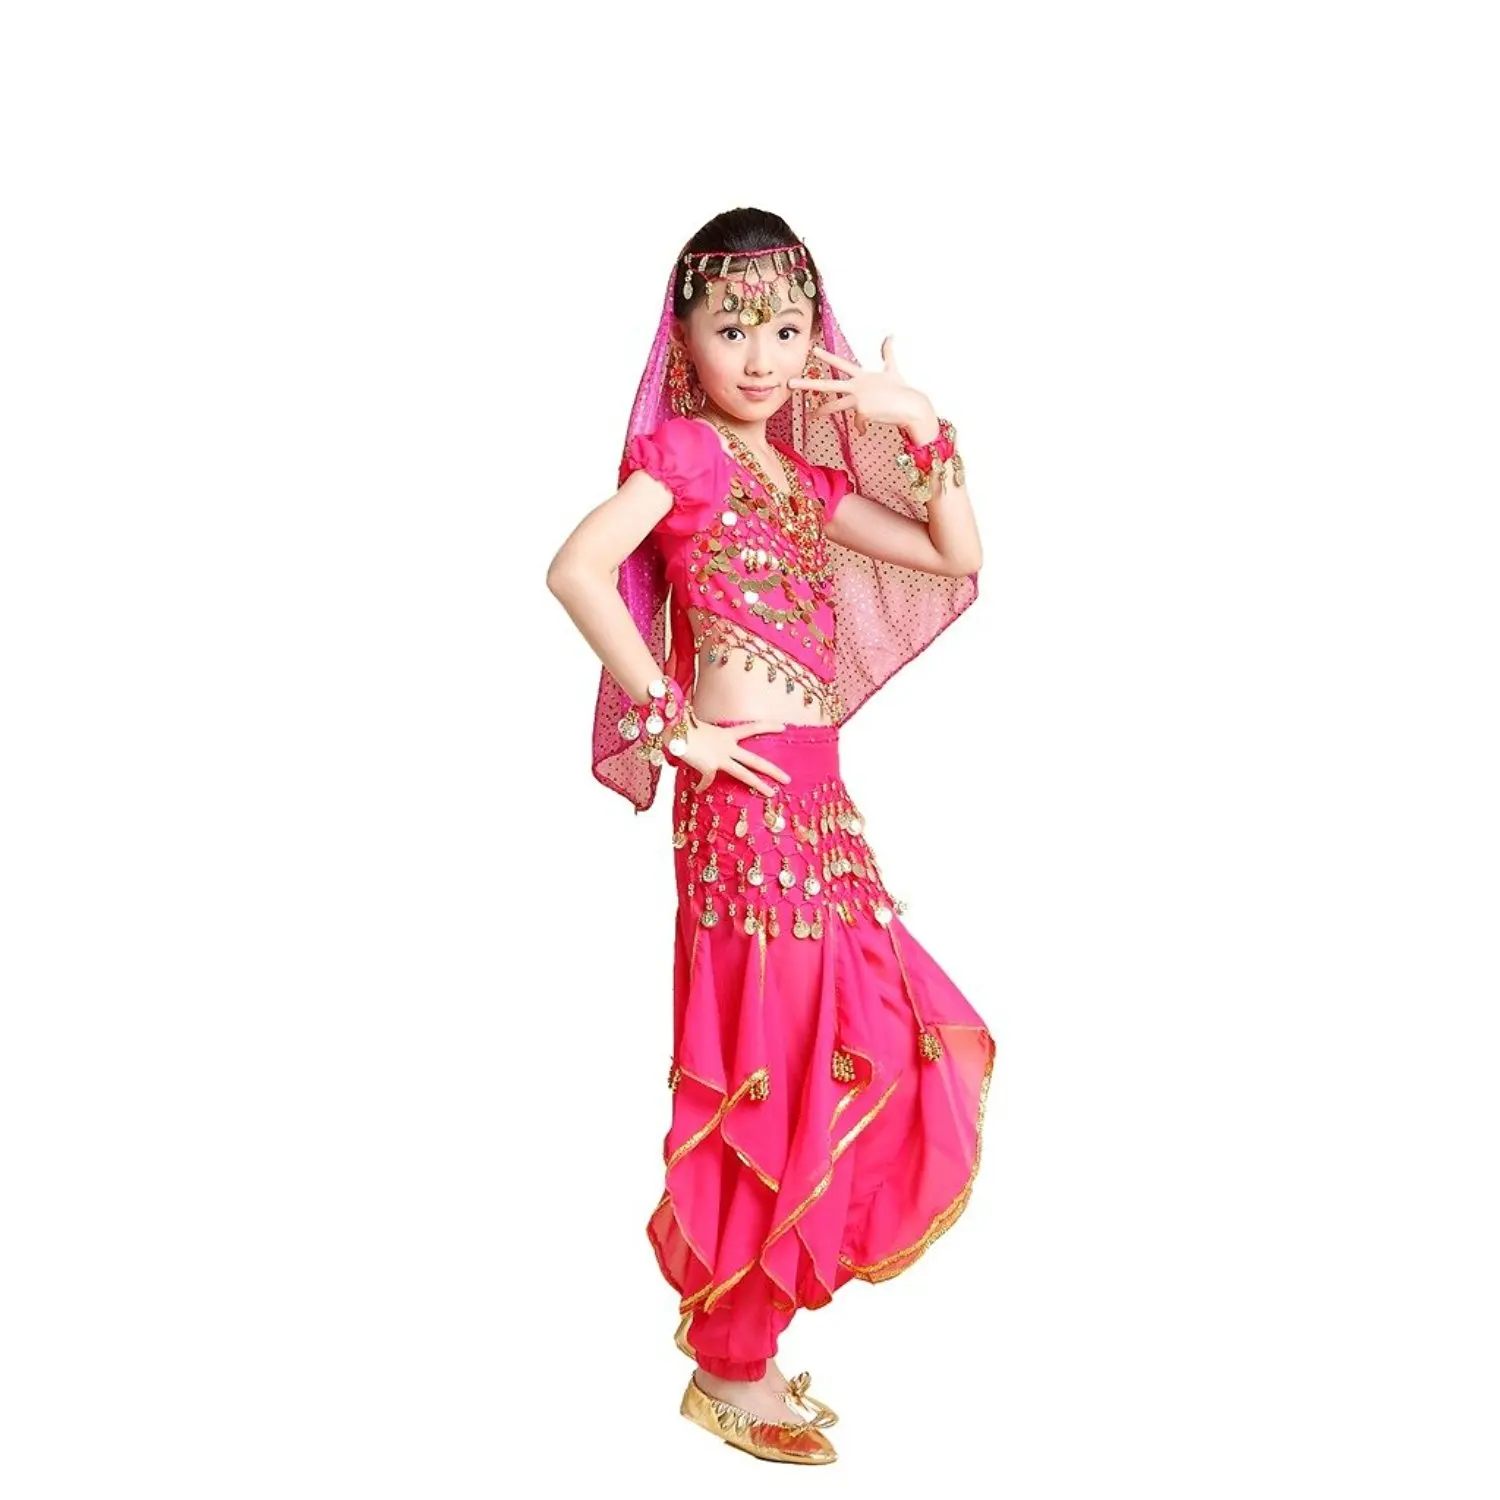 Cheap Indian Girl Dance Find Indian Girl Dance Deals On Line At Alibaba Com